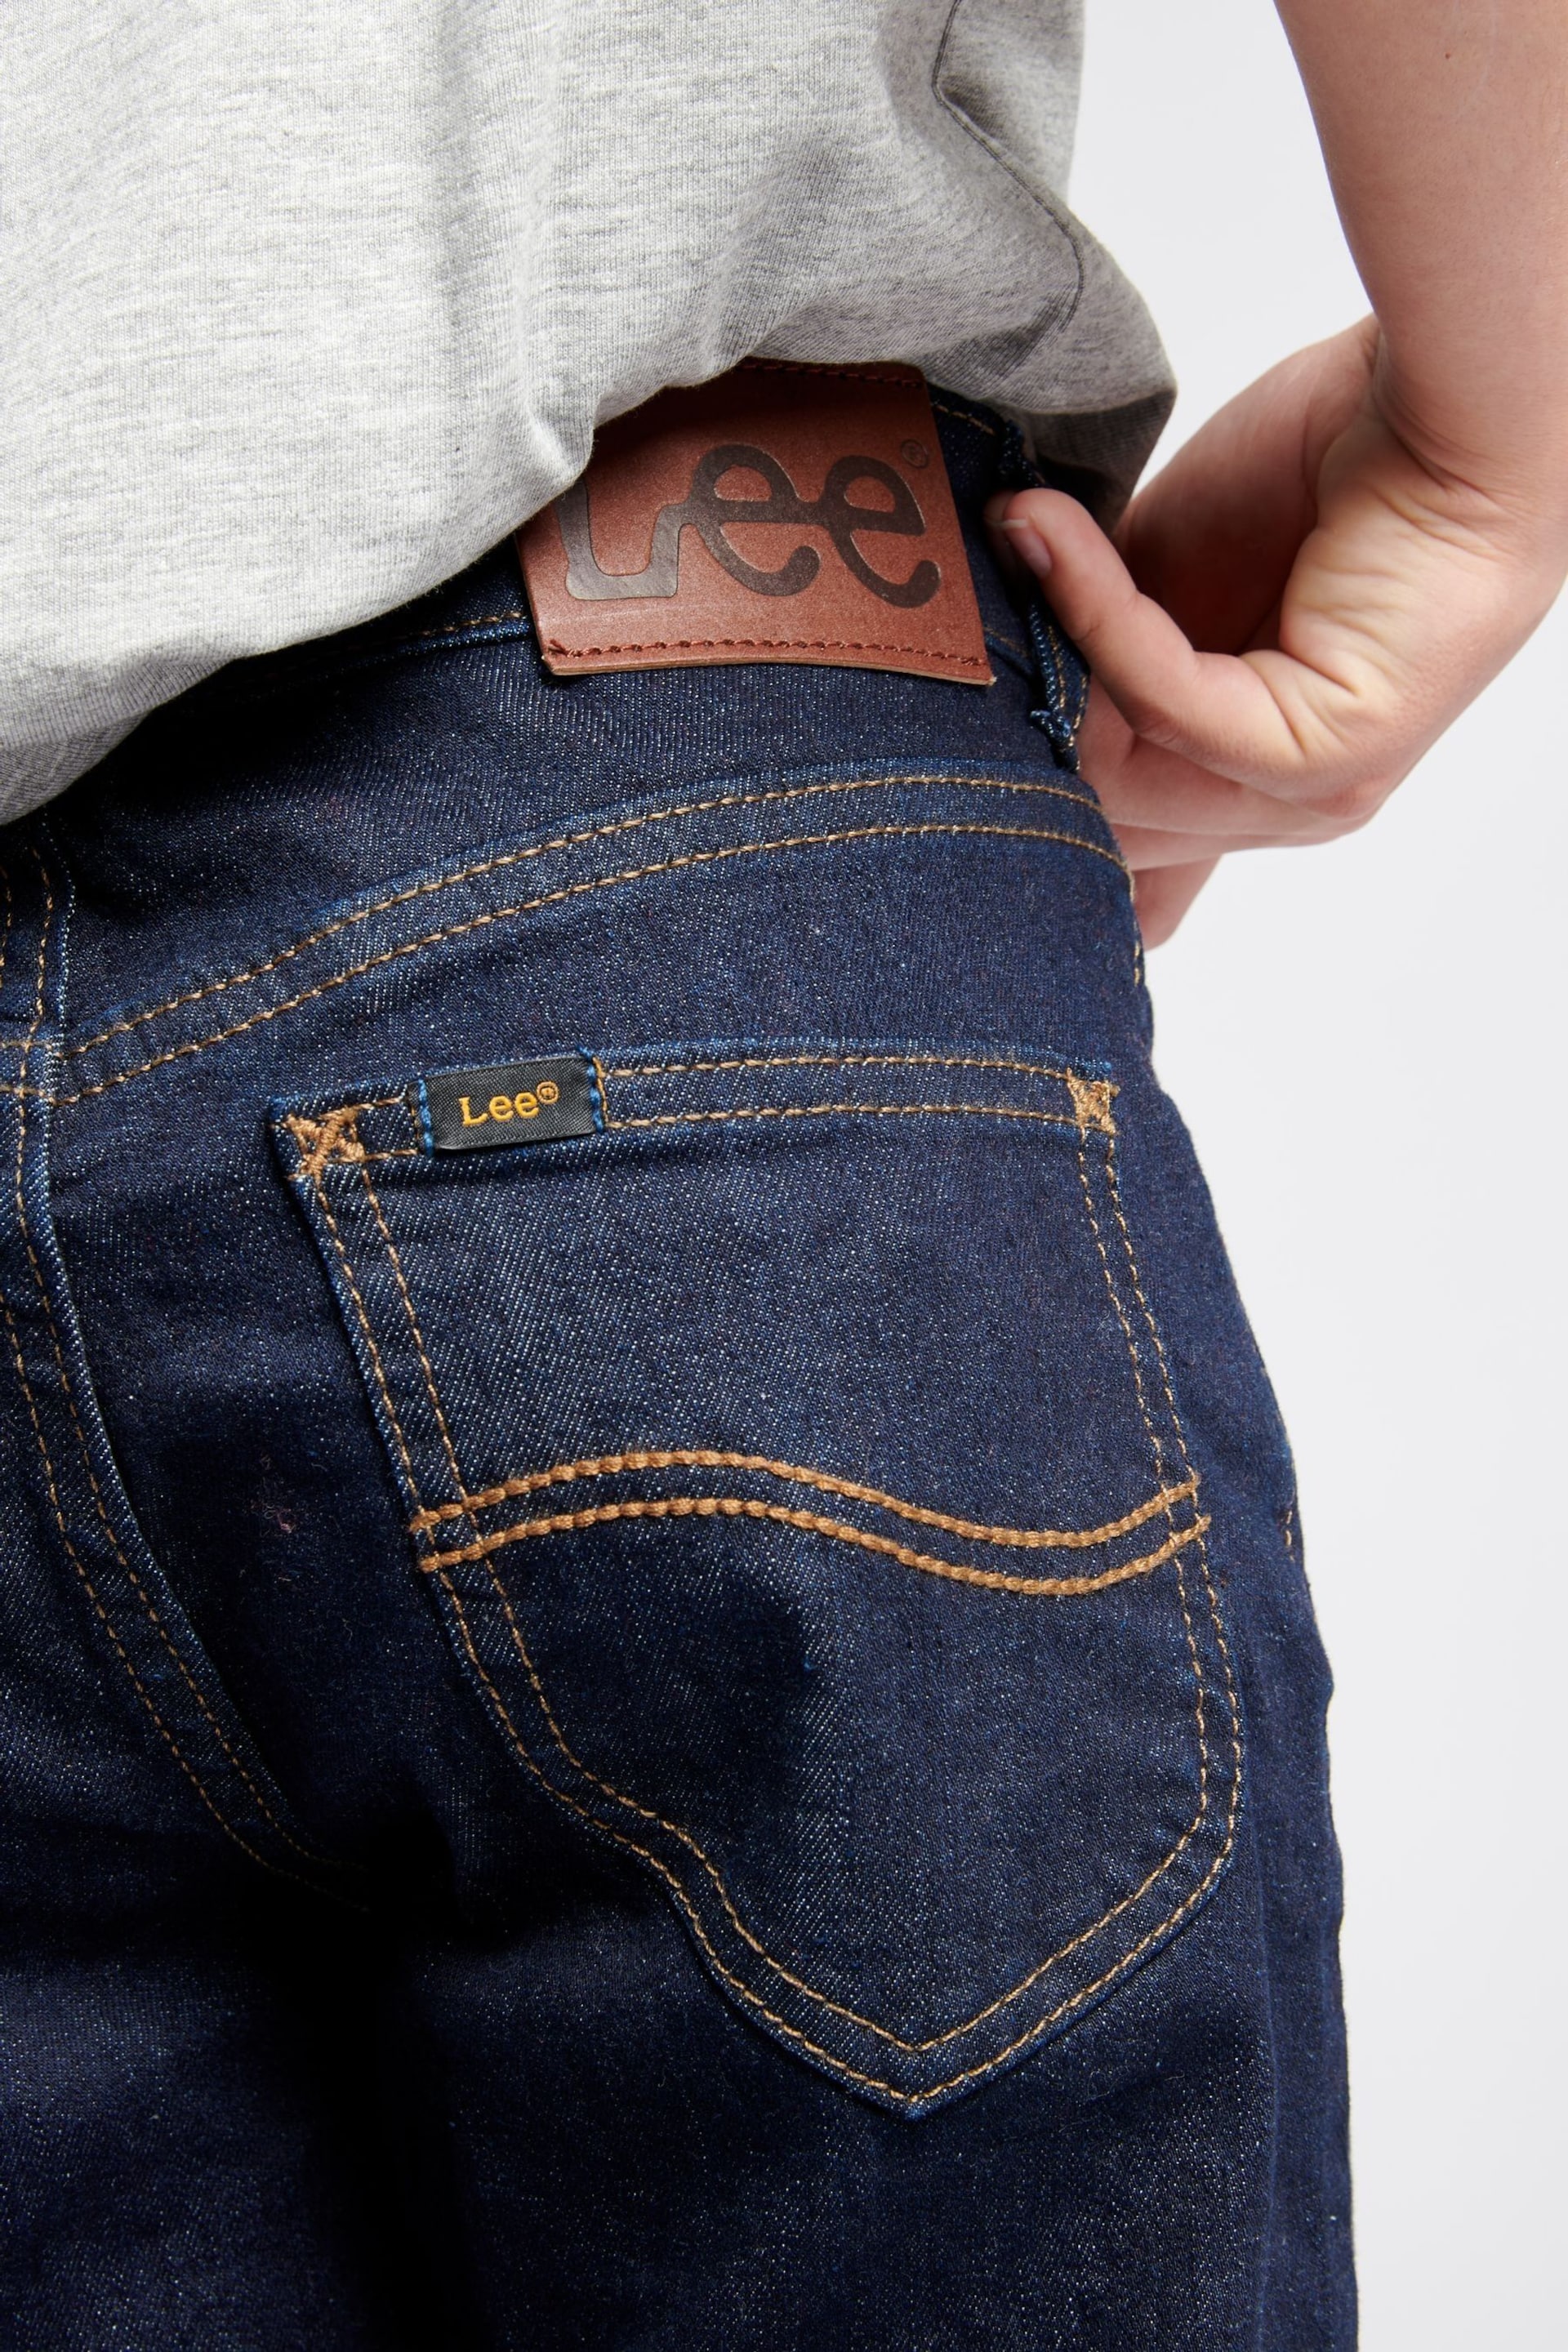 Lee Boys Daren Straight Fit Jeans - Image 6 of 7